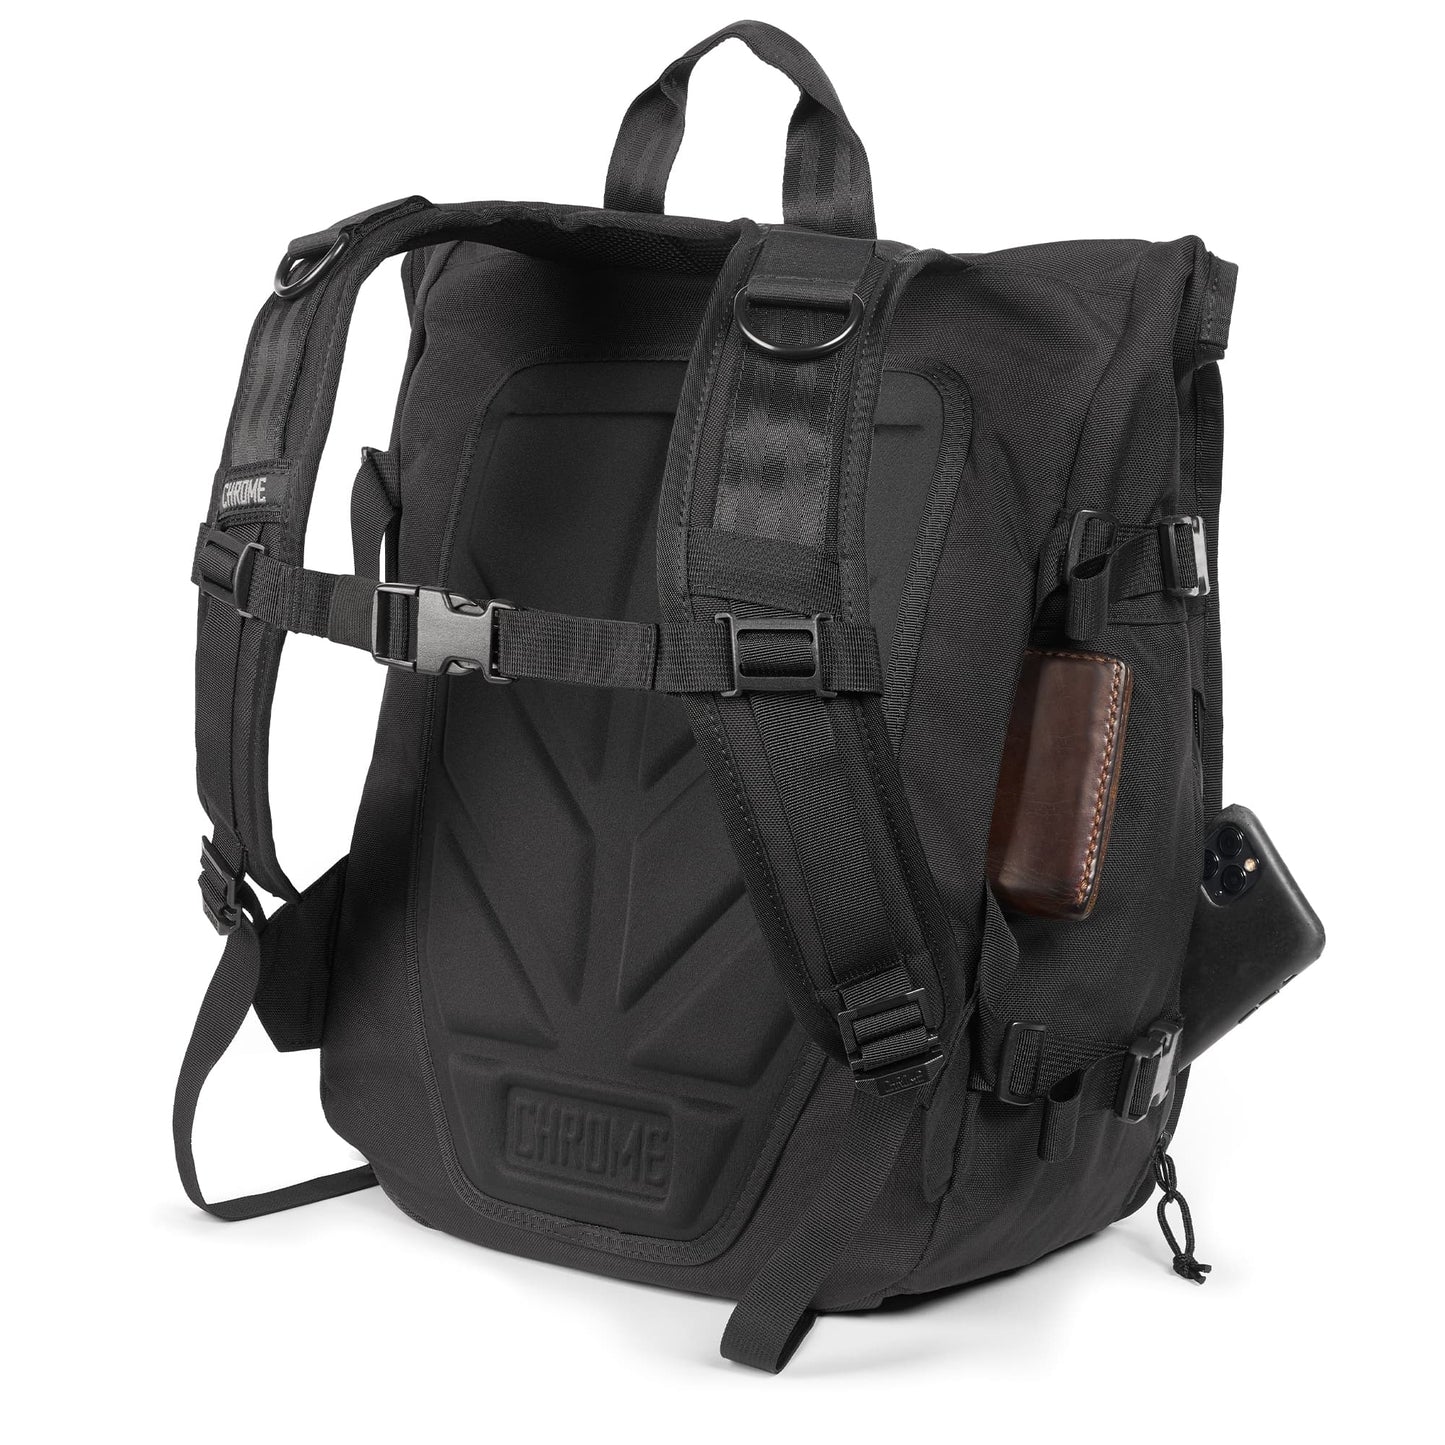 Chrome Industries Warsaw MD Backpack